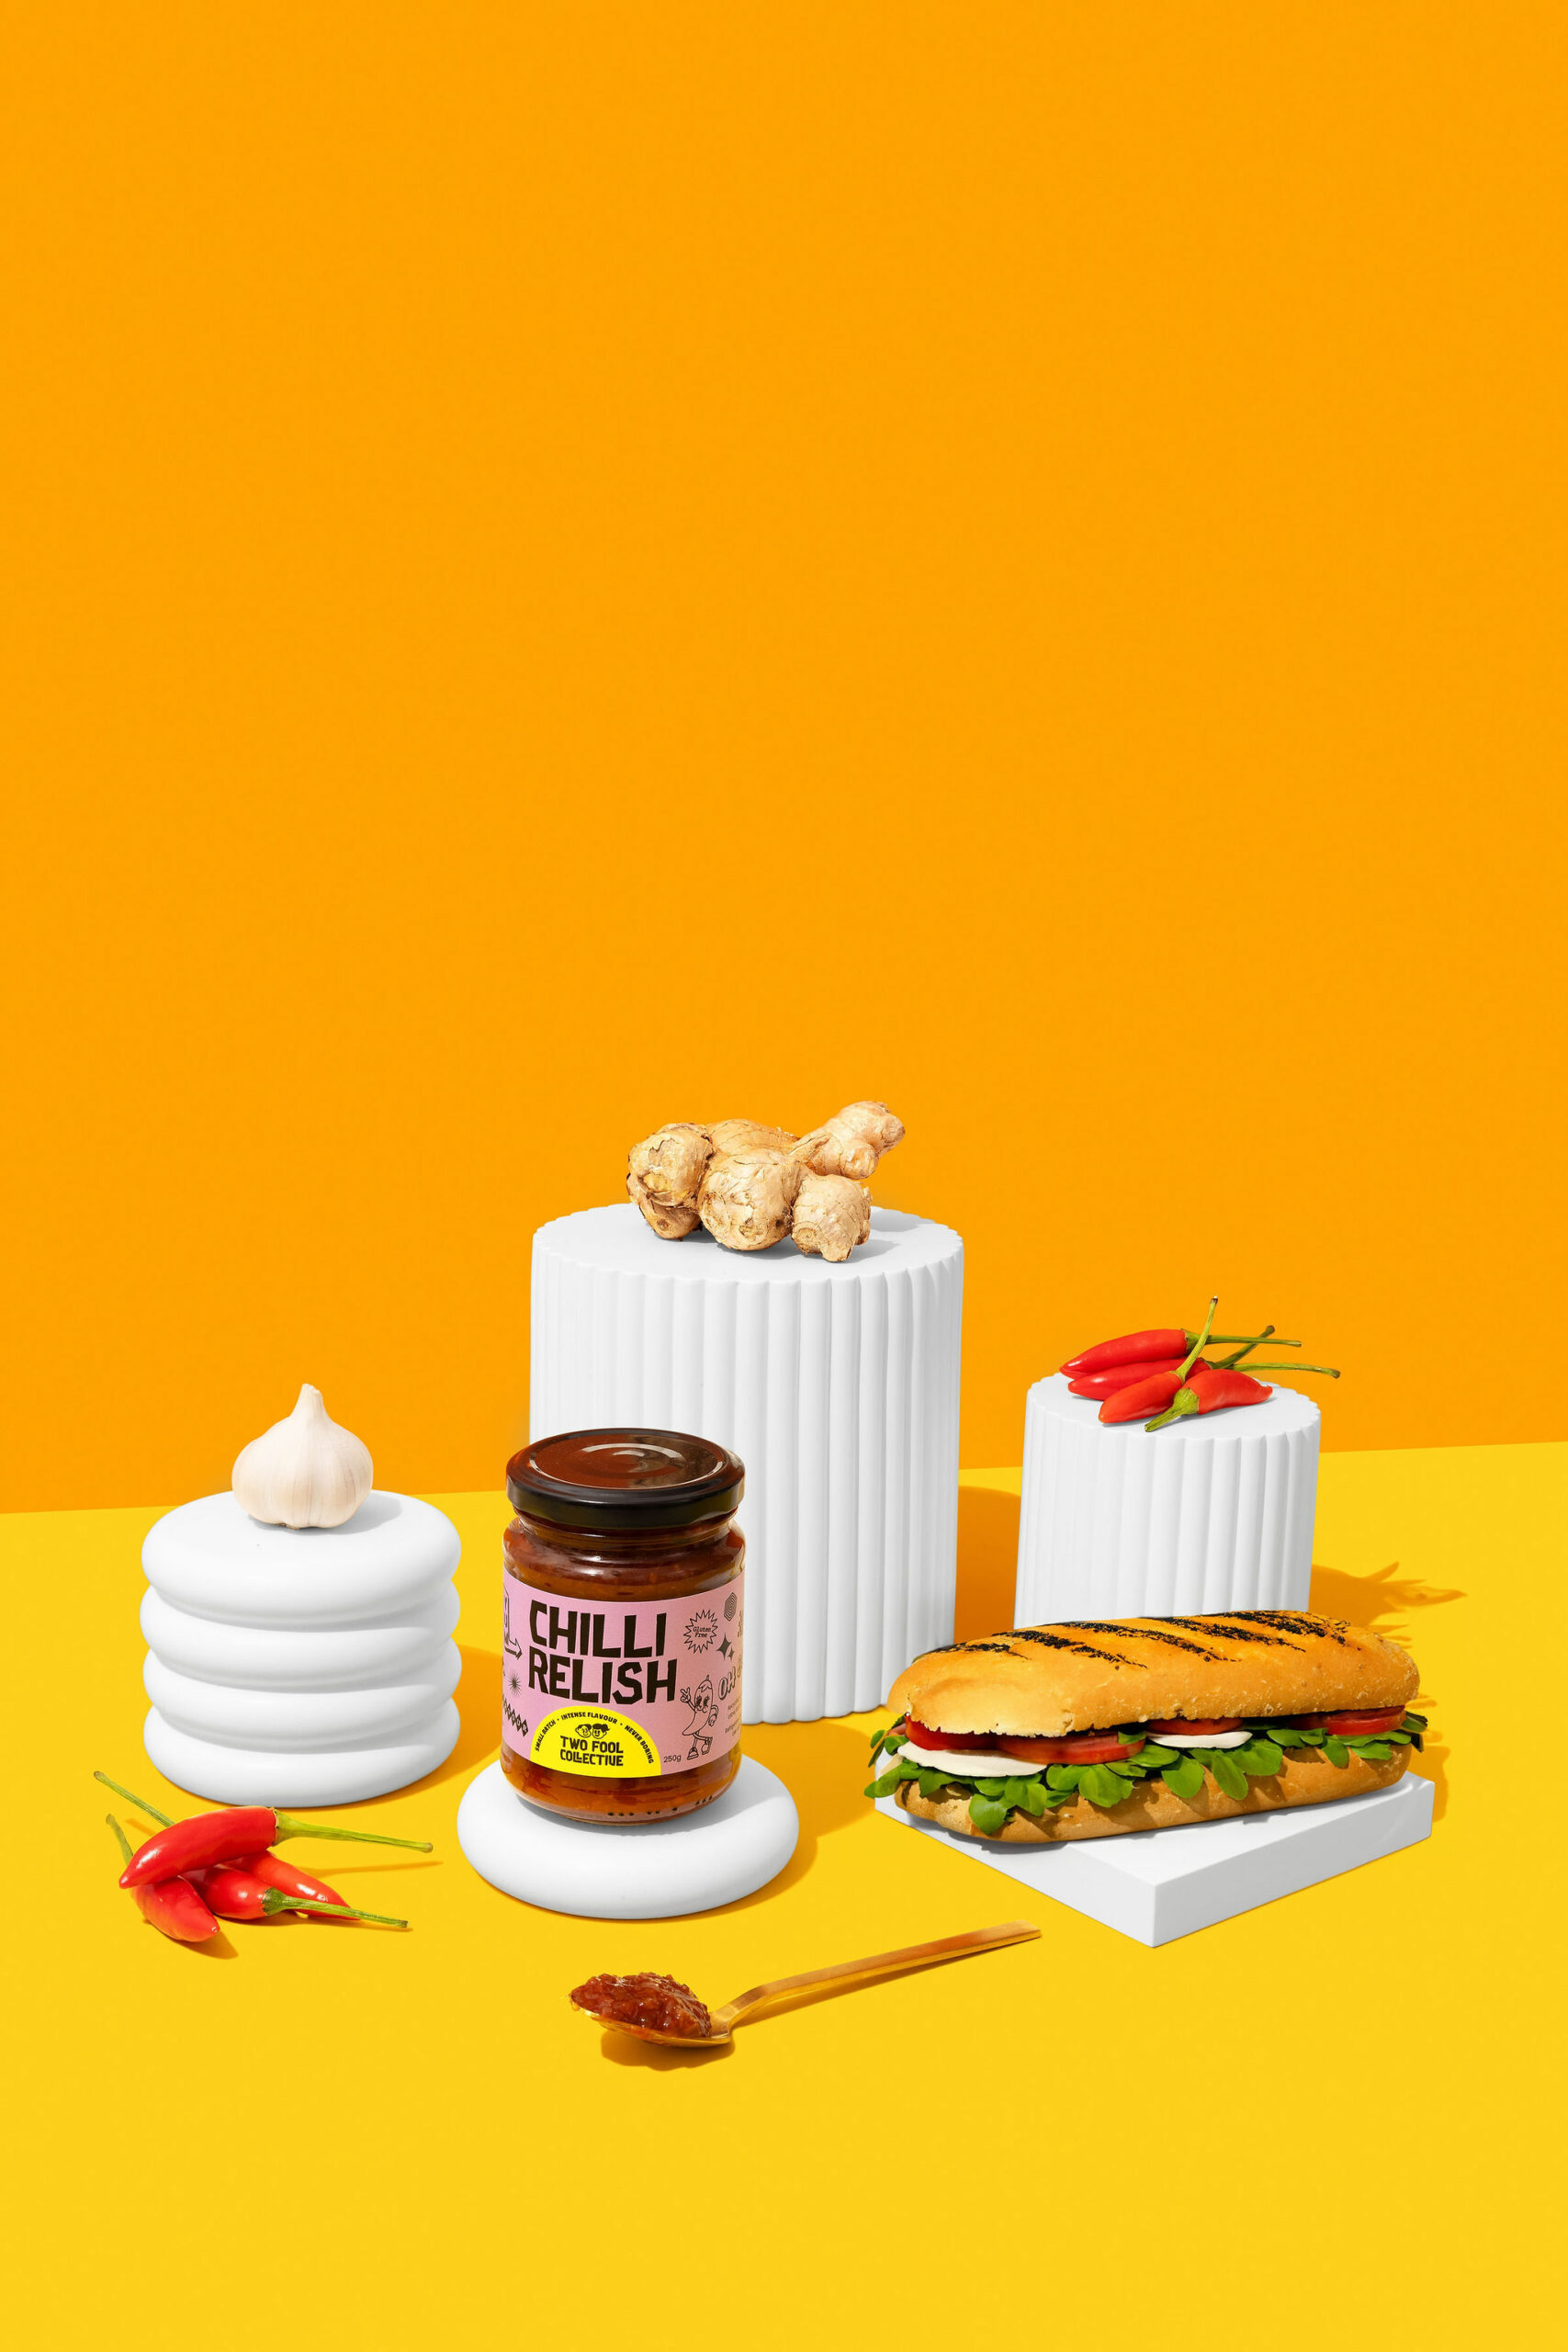 Colourful food product photography for a relish brand. Creative product photography by Colourpop studio